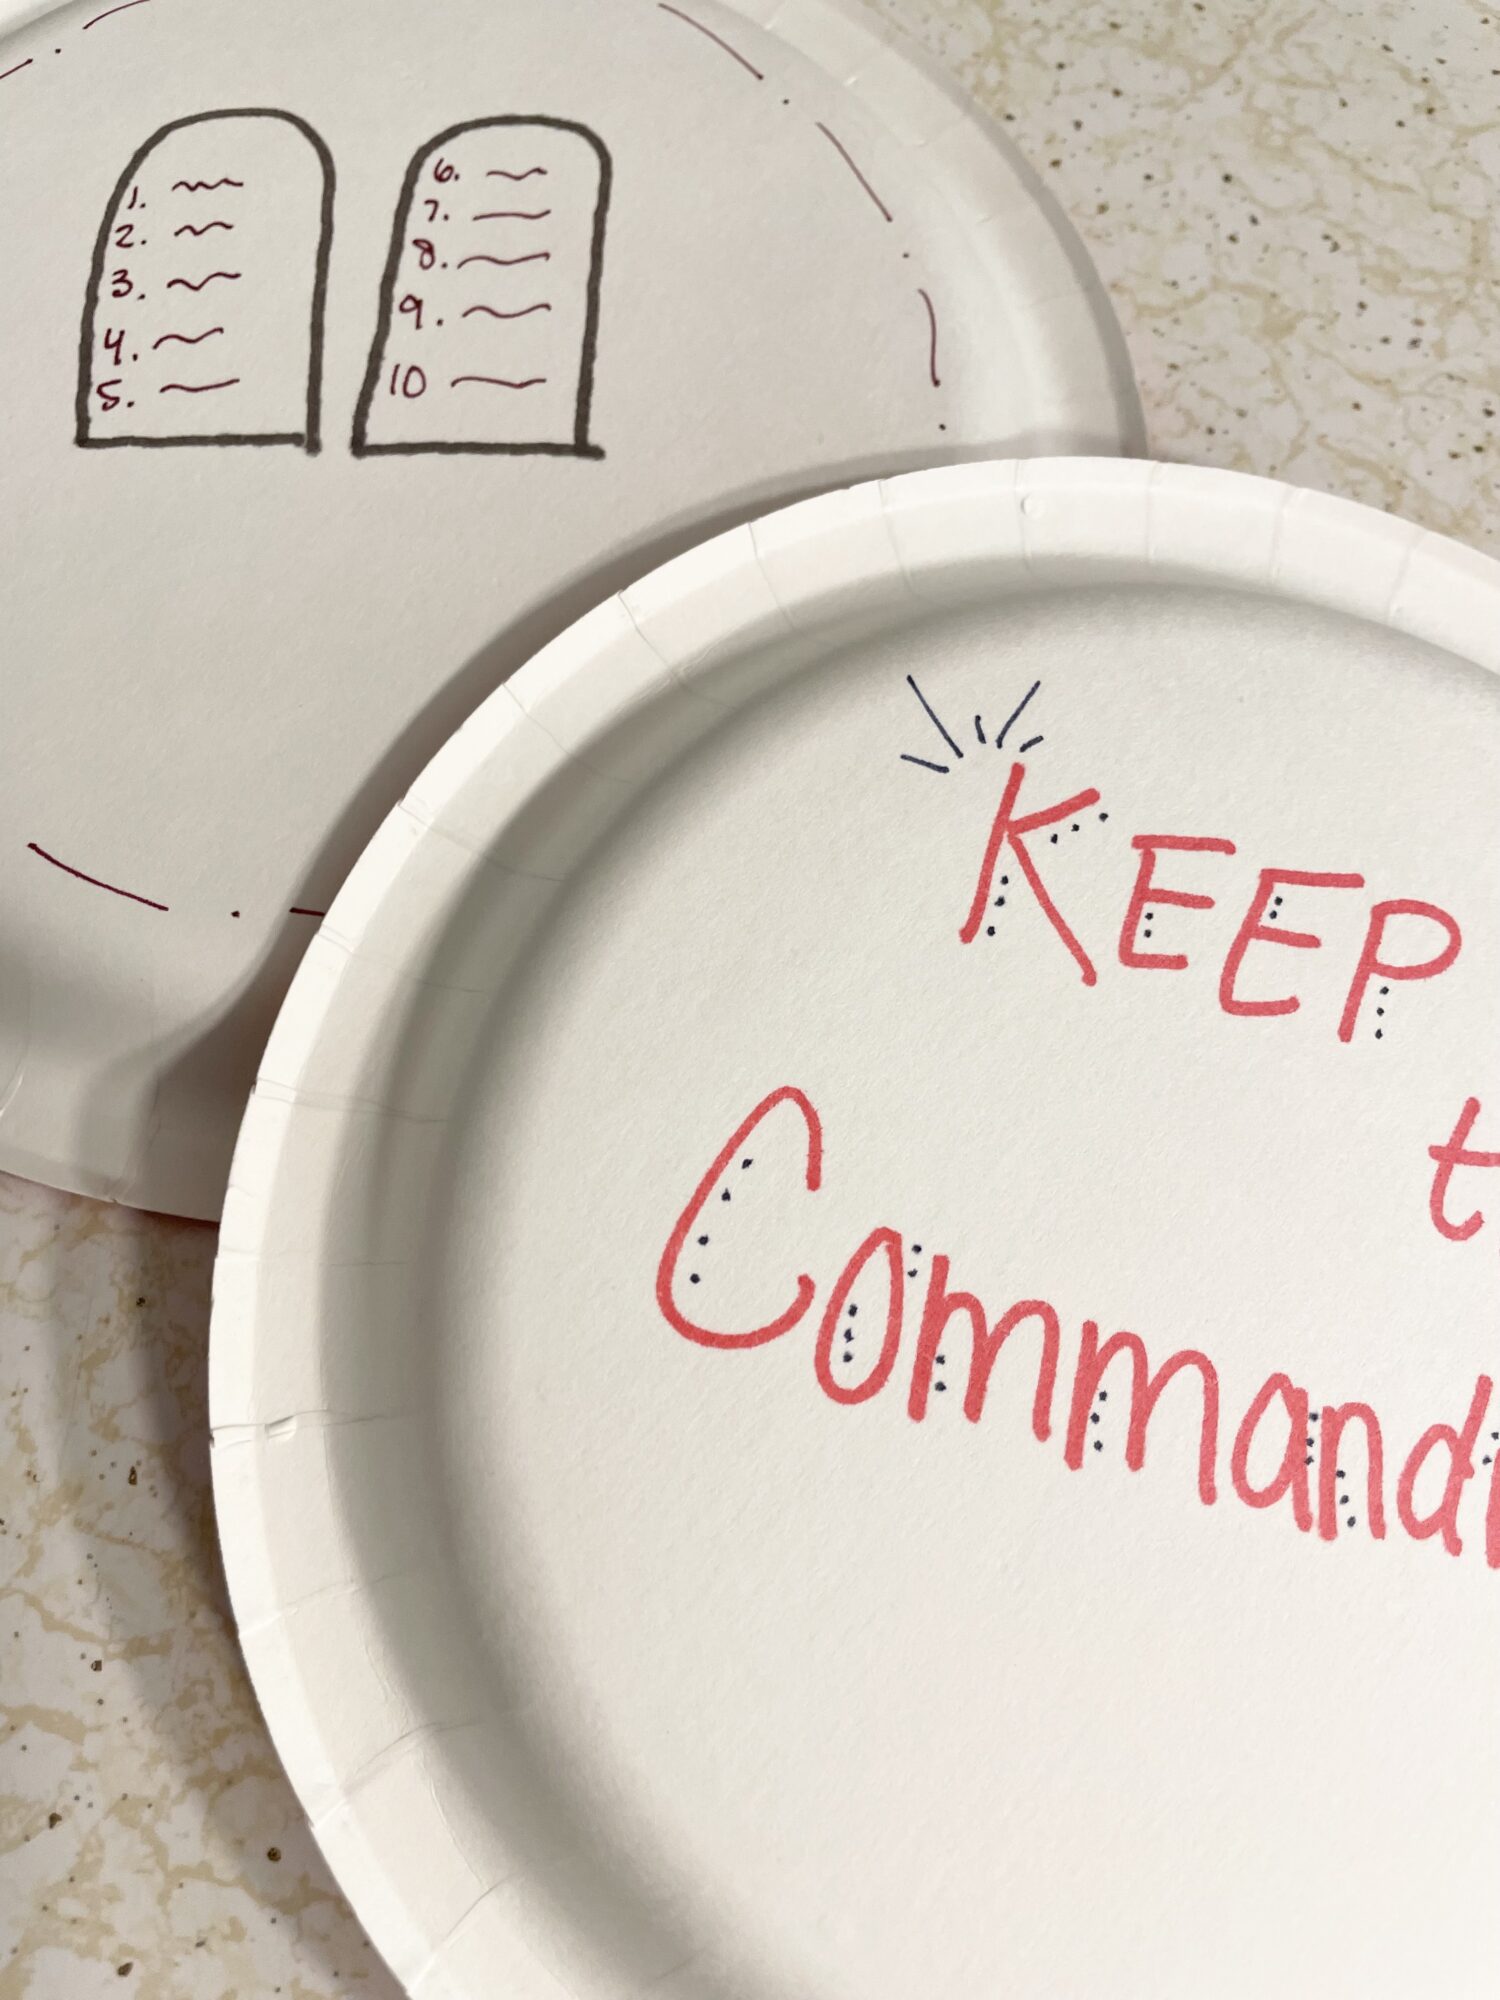 Keep the Commandments Paper Plates singing time idea with song helps for LDS Primary Music Leaders fun movement activity for teaching this song